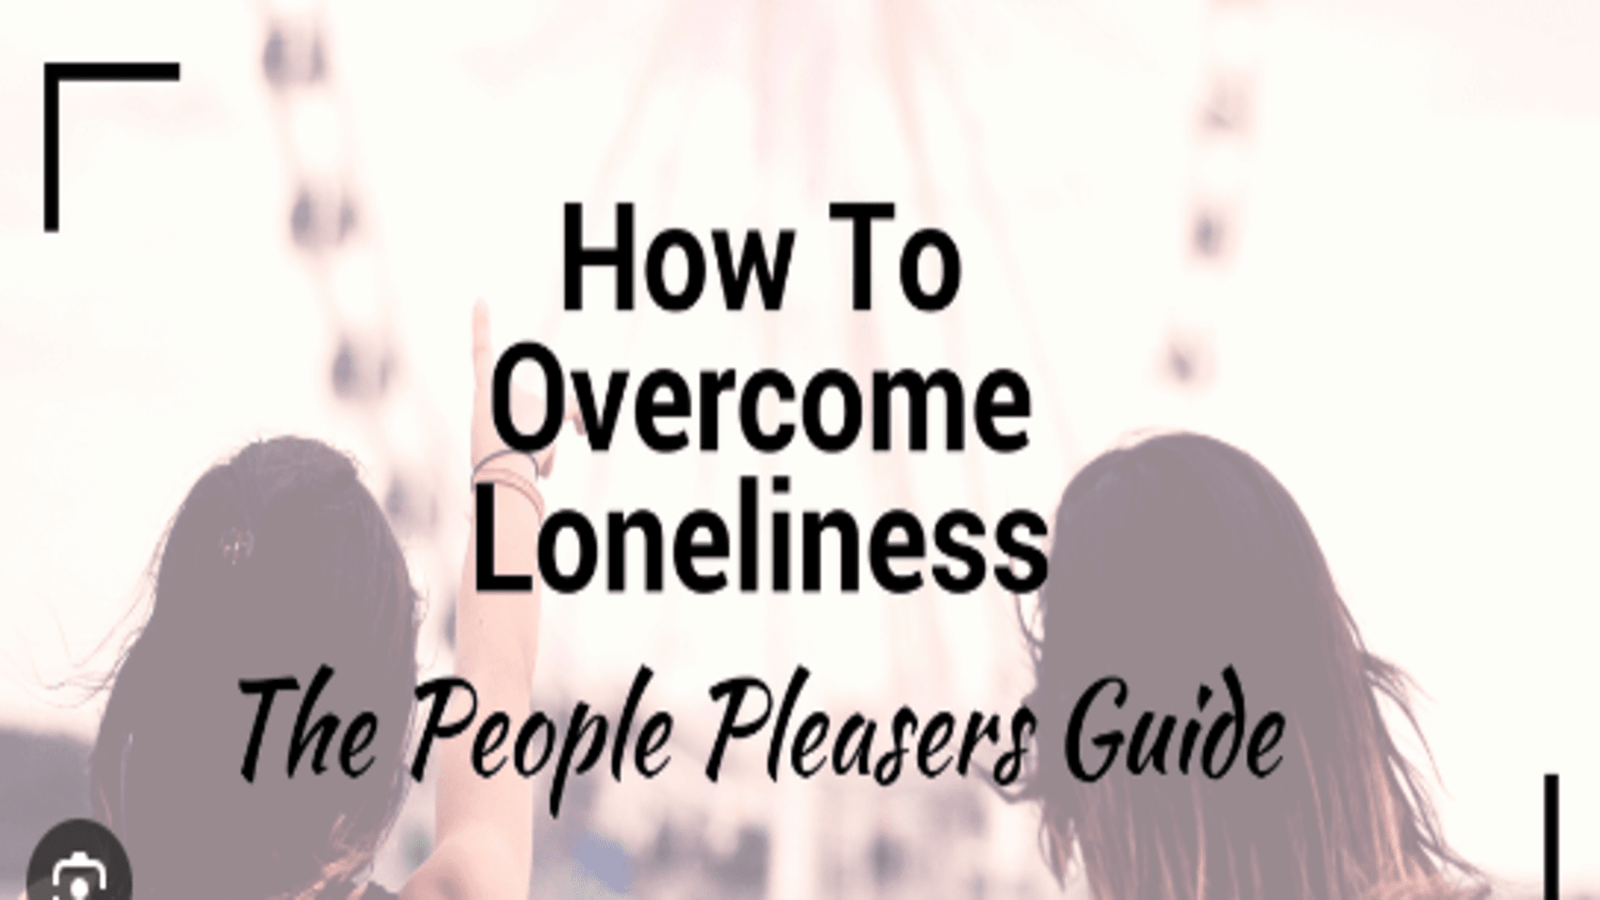 Finding Connection: 7 Ways to Overcome Loneliness